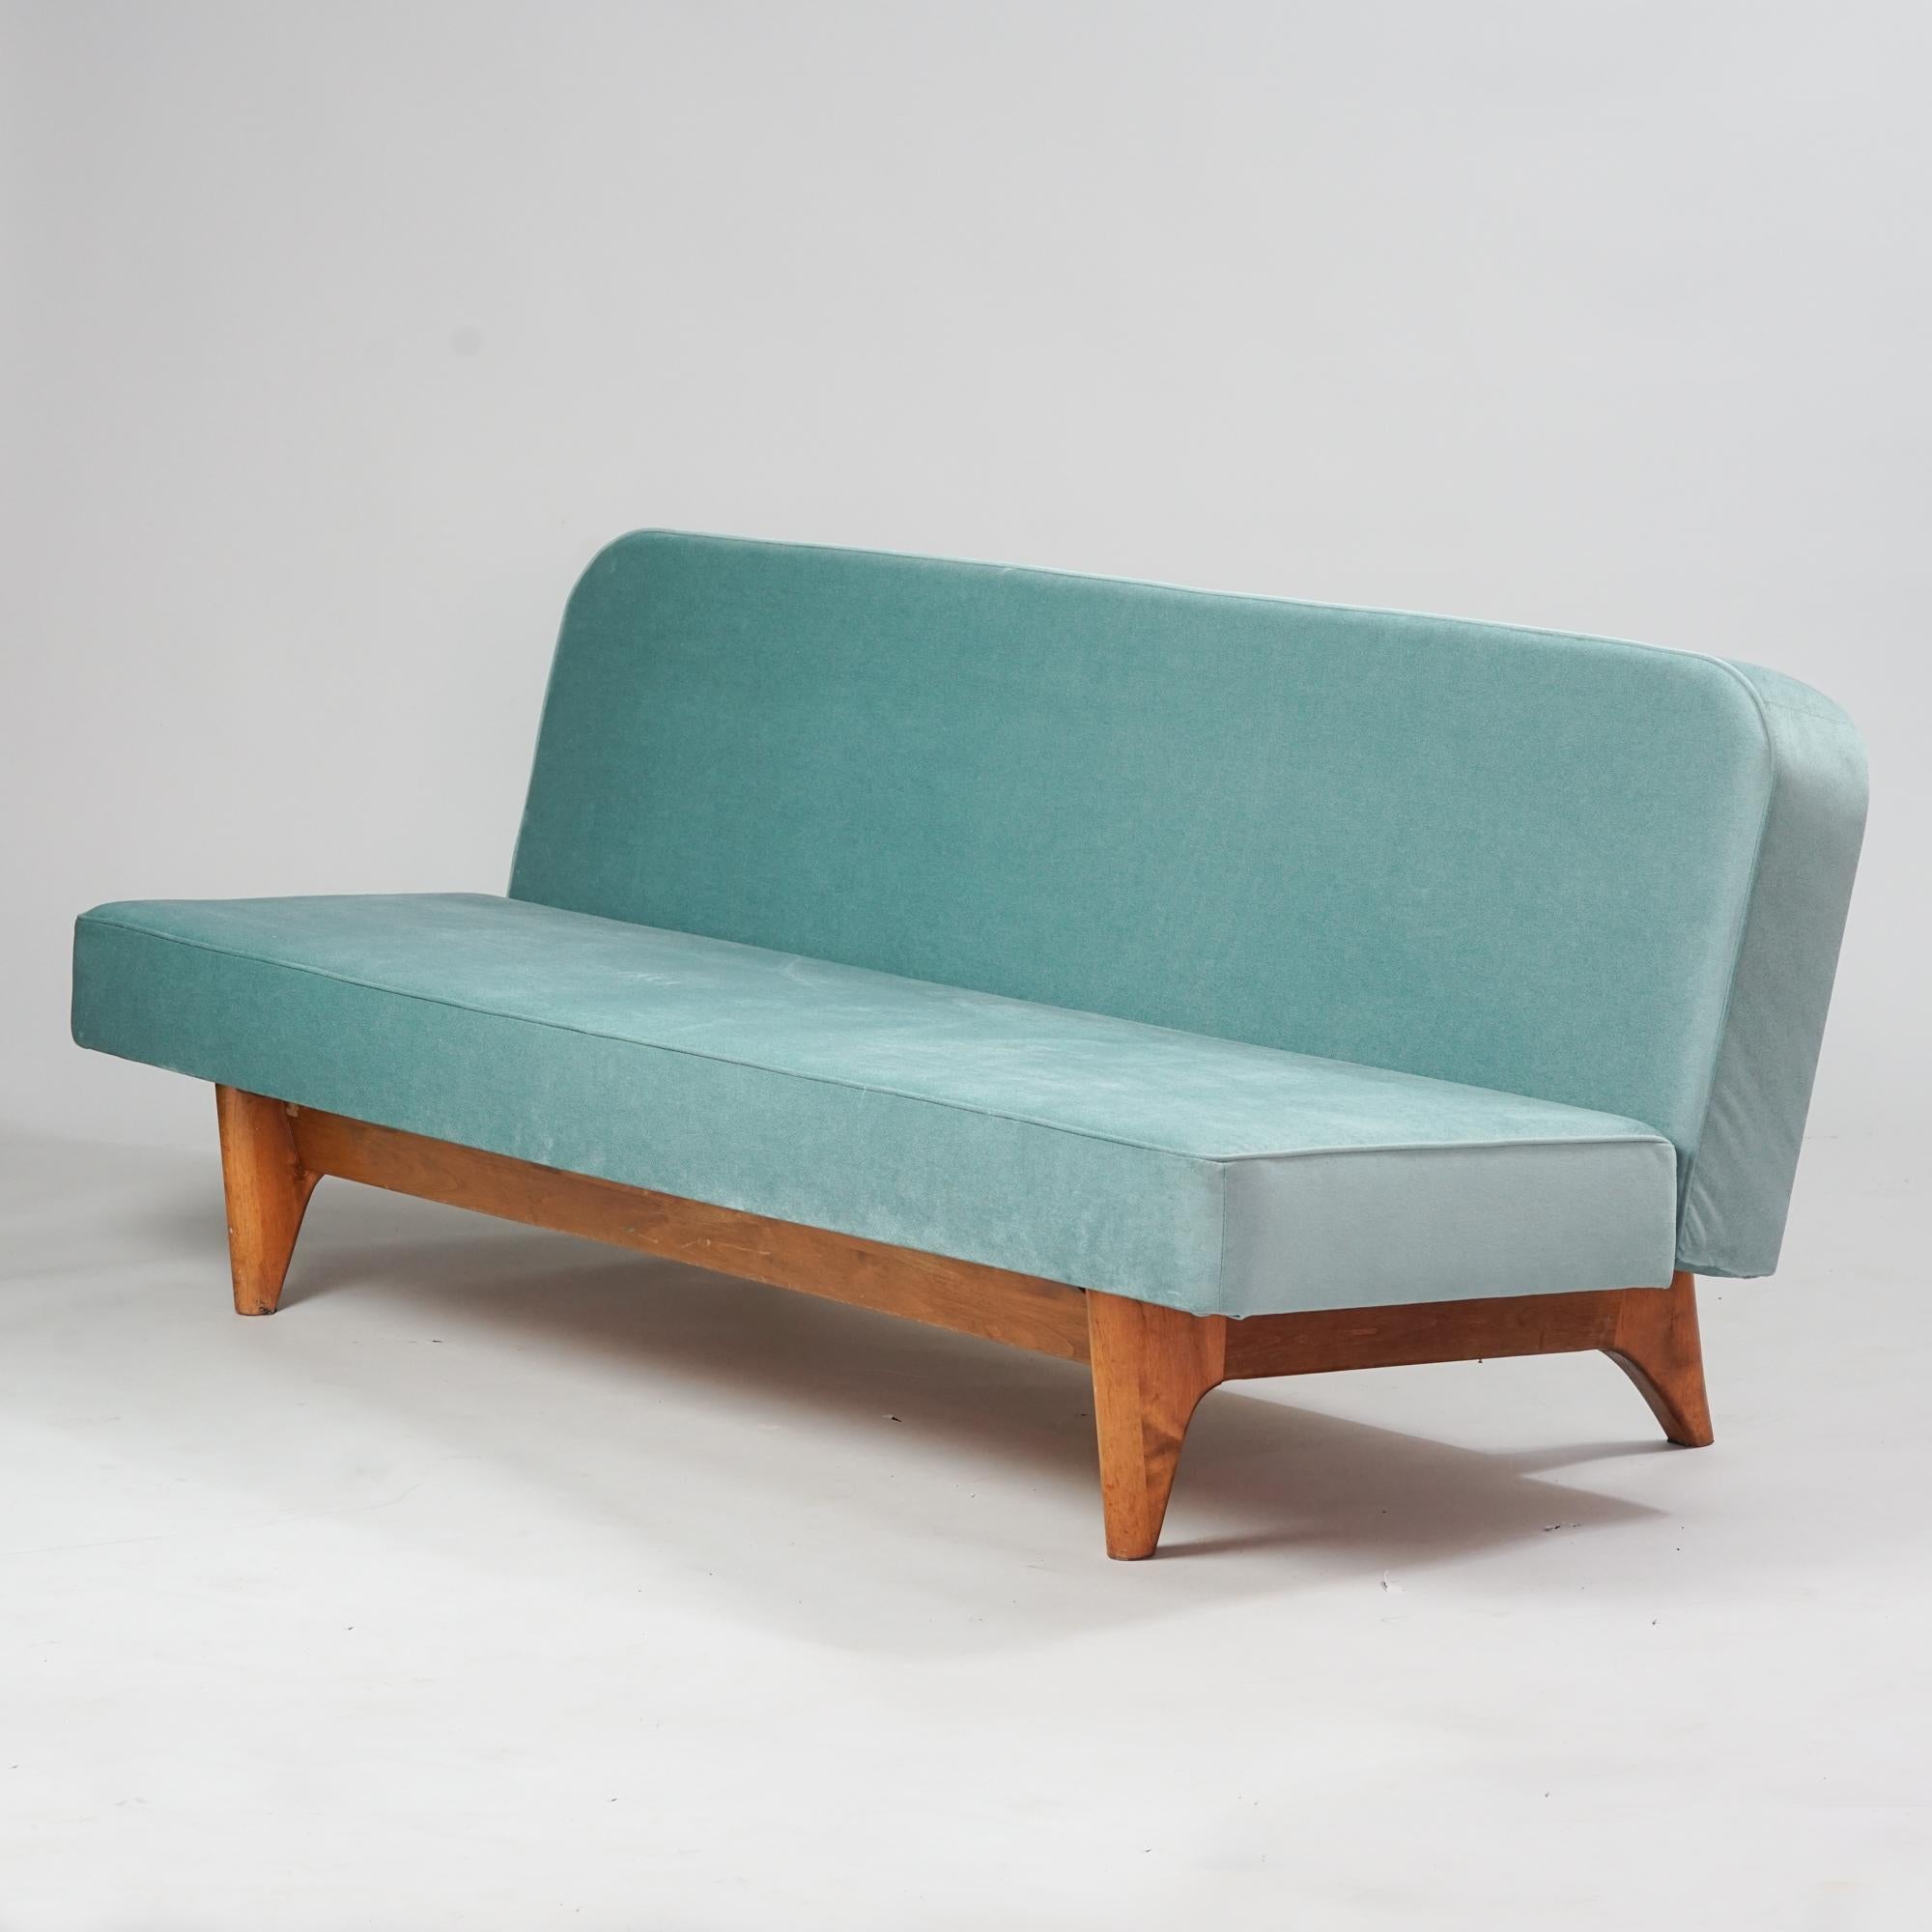 Reclining sofa, manufactured in Finland, 1940/1950s. Stained birch frame, reupholstered with quality Lauritzon's Baby Velour 14 -fabric. Good vintage condition, minor patina consistent with age and use. 